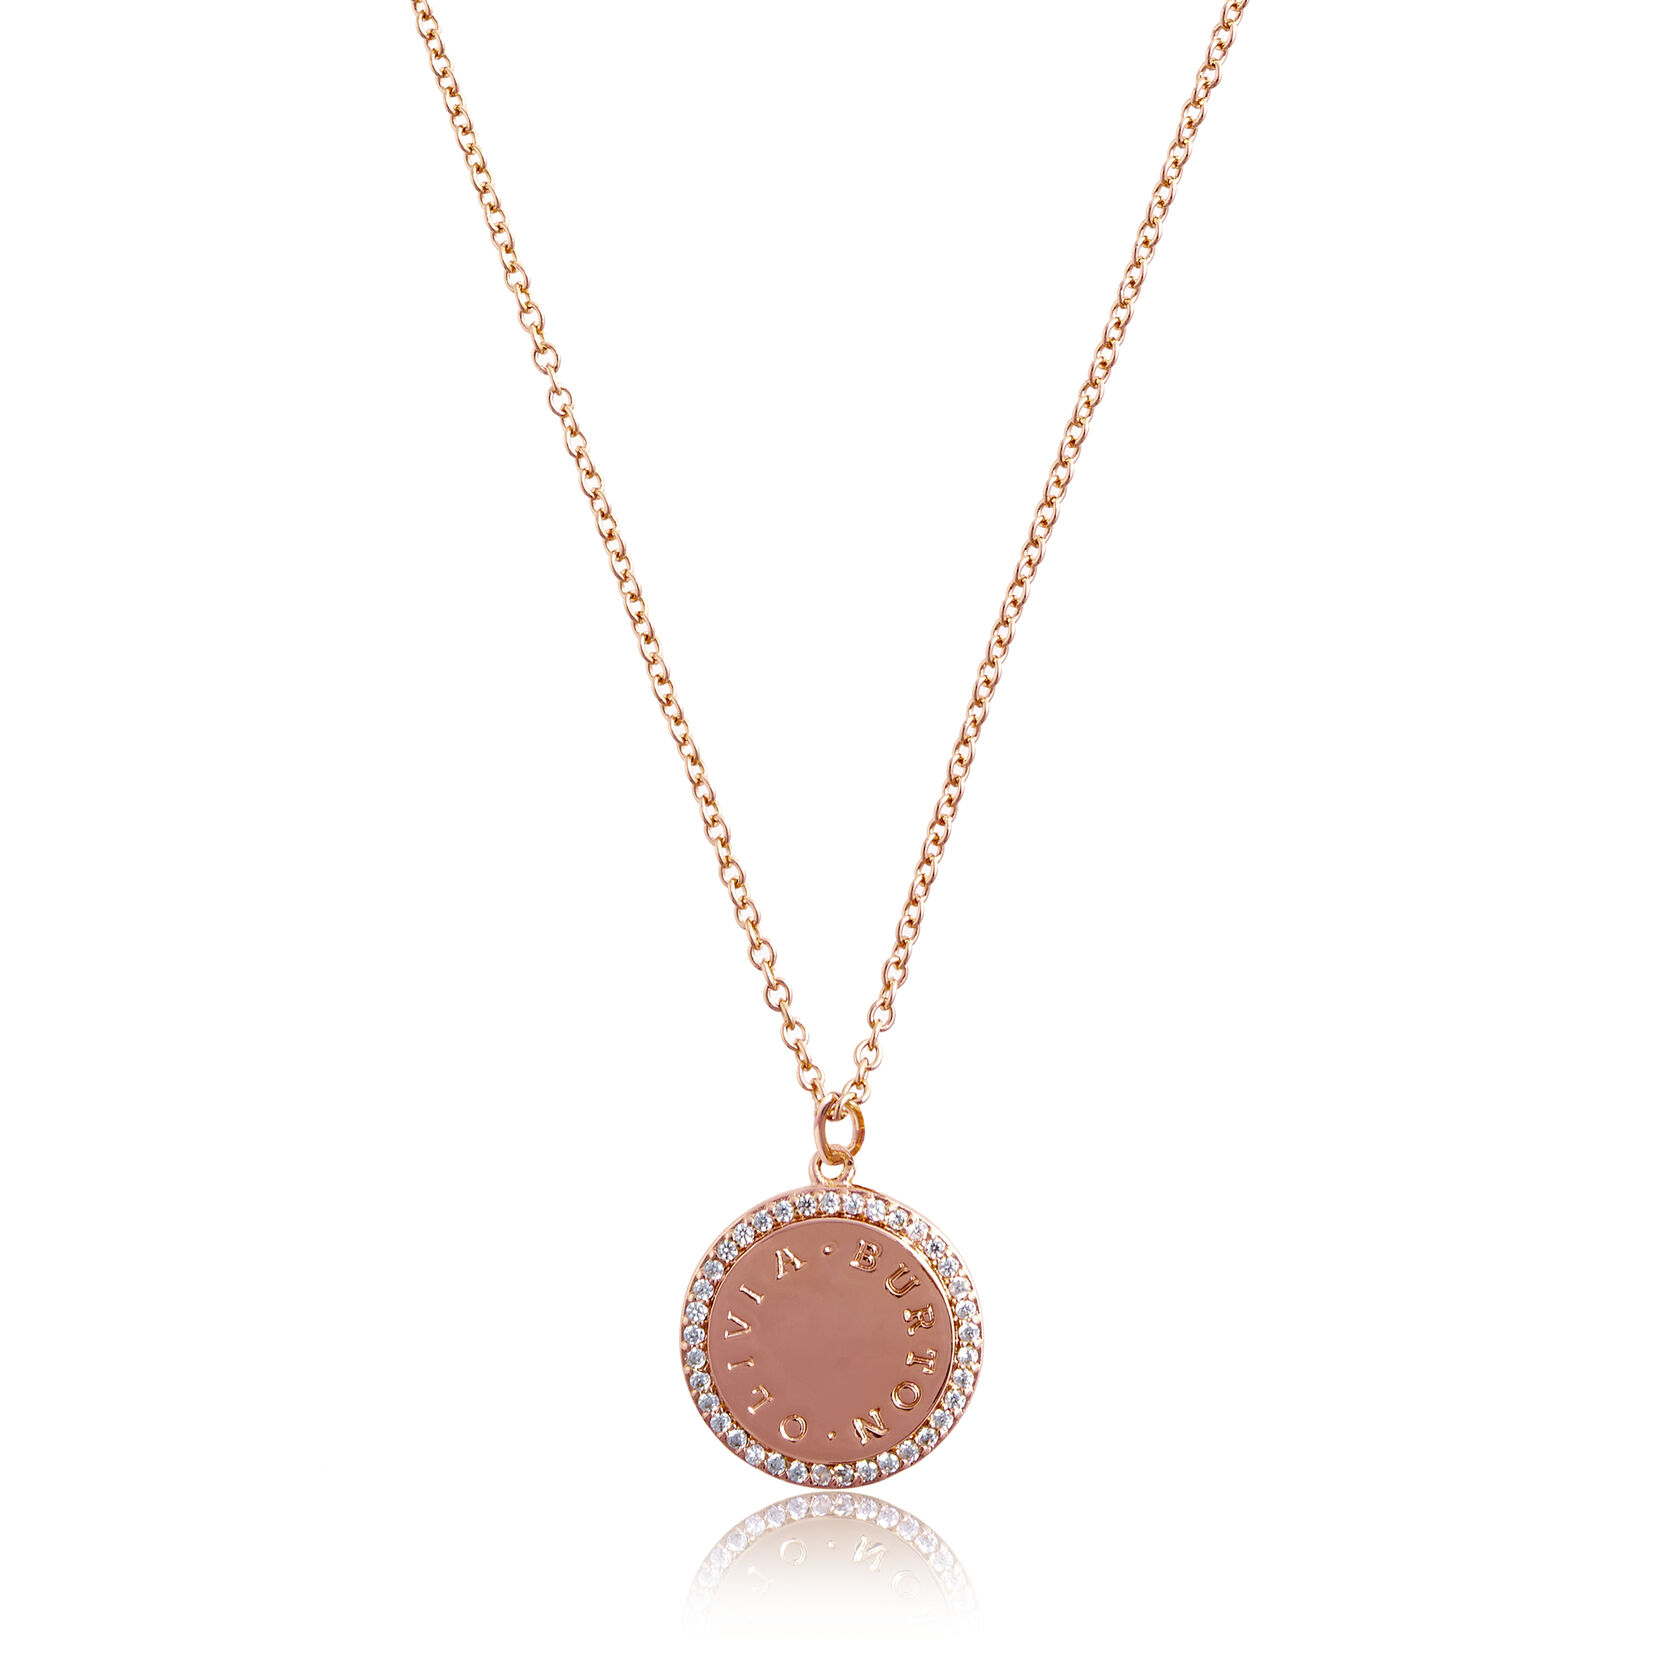 Bejeweled Classics Rose Gold Disc Necklace